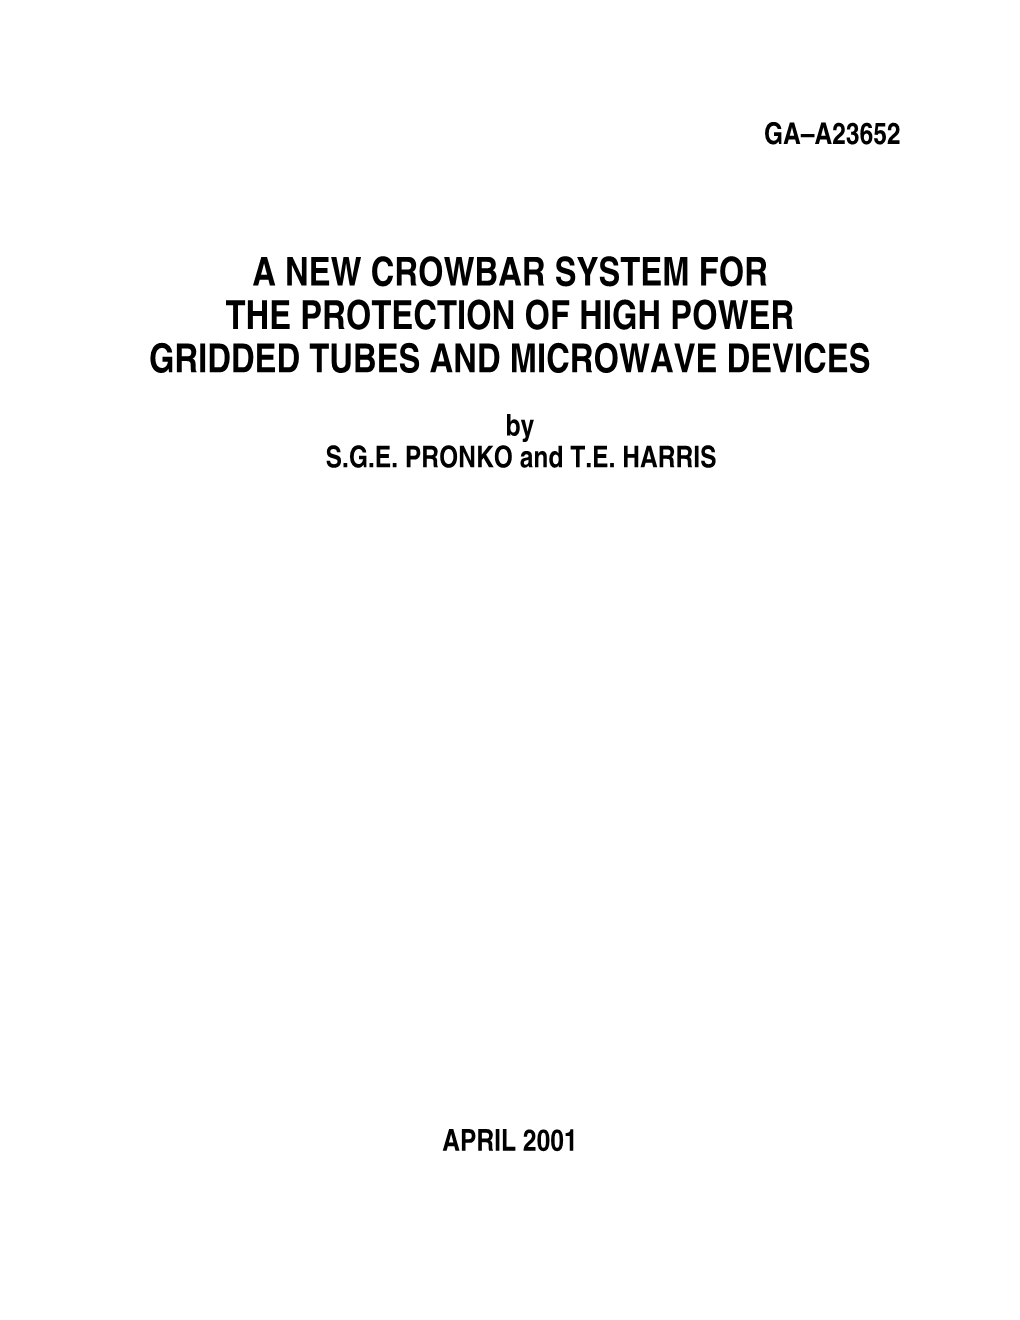 A New Crowbar System for the Protection of High Power Gridded Tubes and Microwave Devices